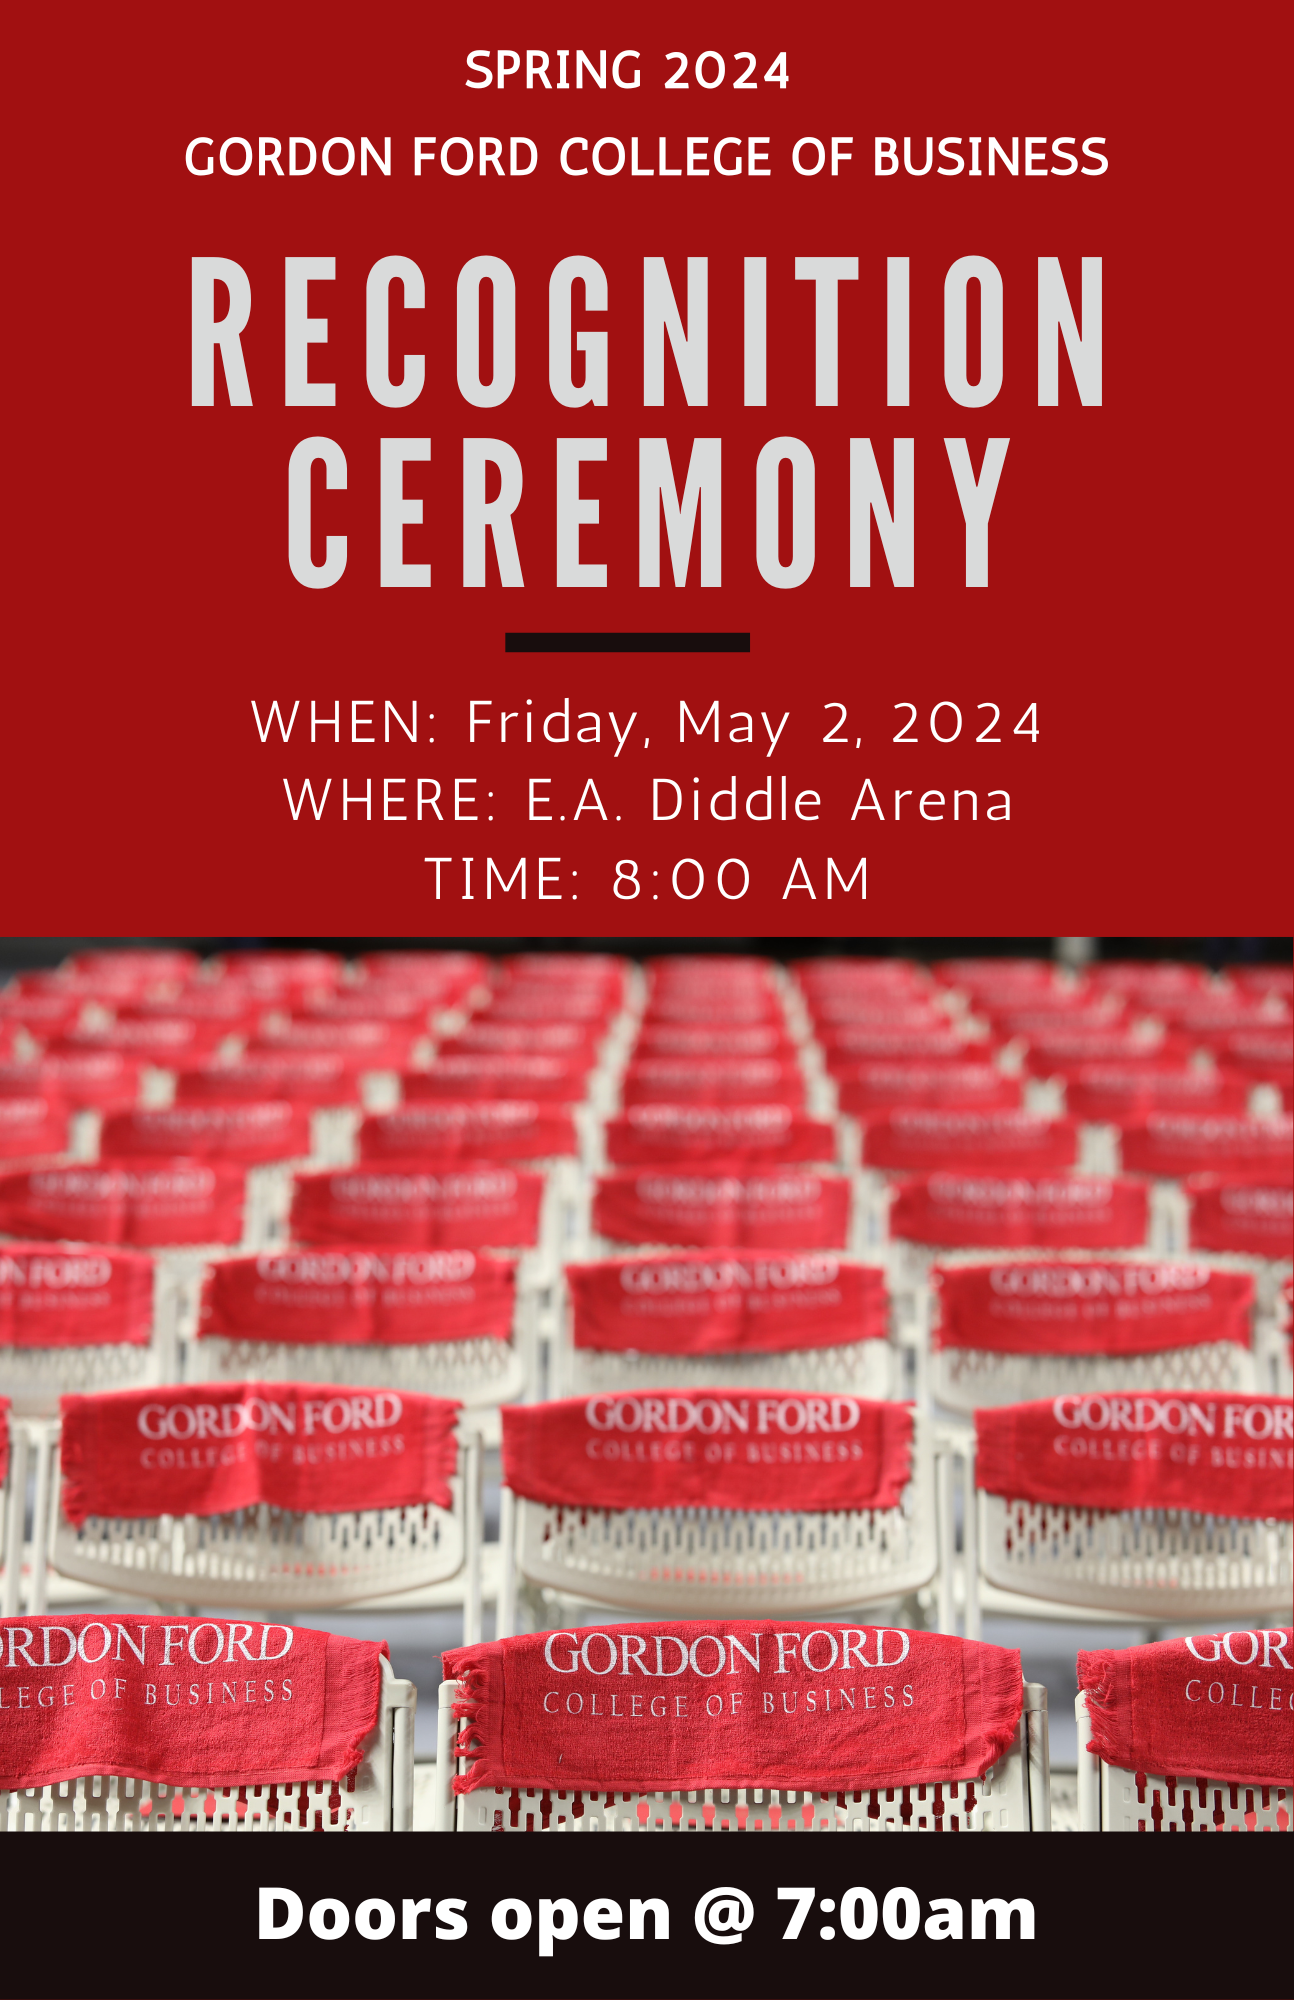 The GFCB ceremony for Friday, May 2 will start at 8:00am in E.A. Diddle Arena. Doors open at 7:00am